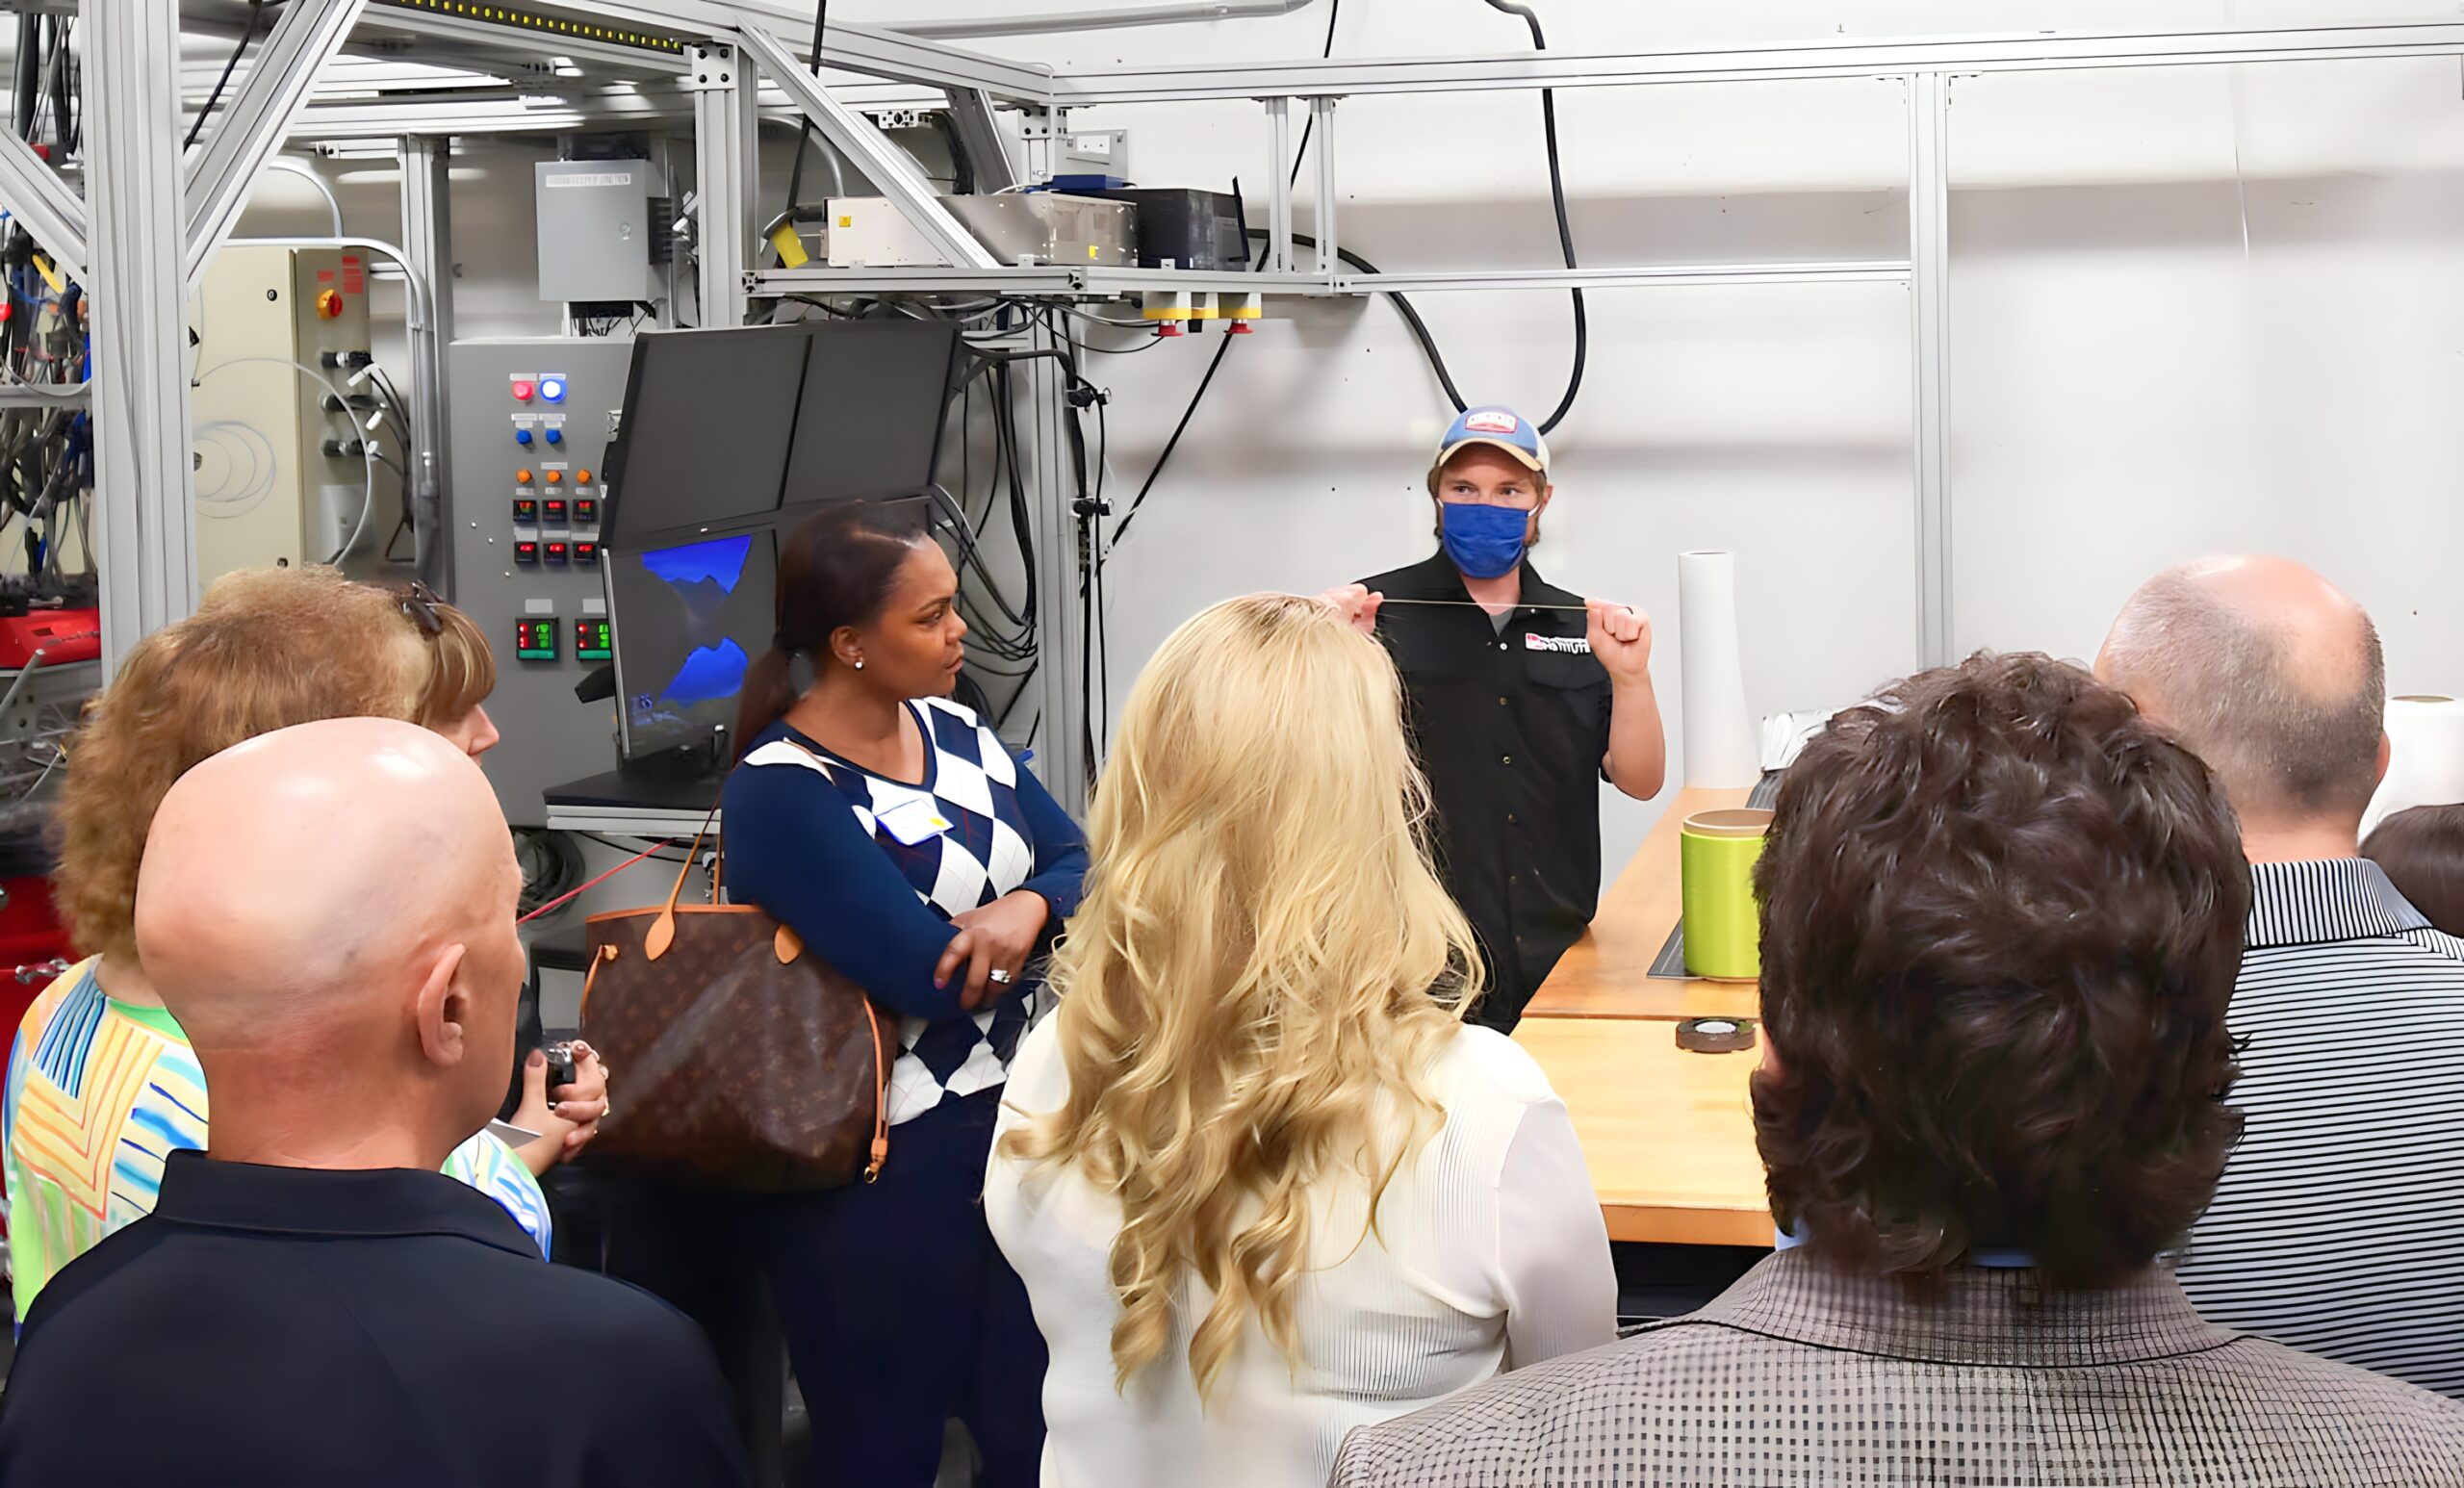 Fiber and Polymer Science Lab Manager Eric Lawrence demonstrates the elasticity characteristics of a fiber for a tour group.